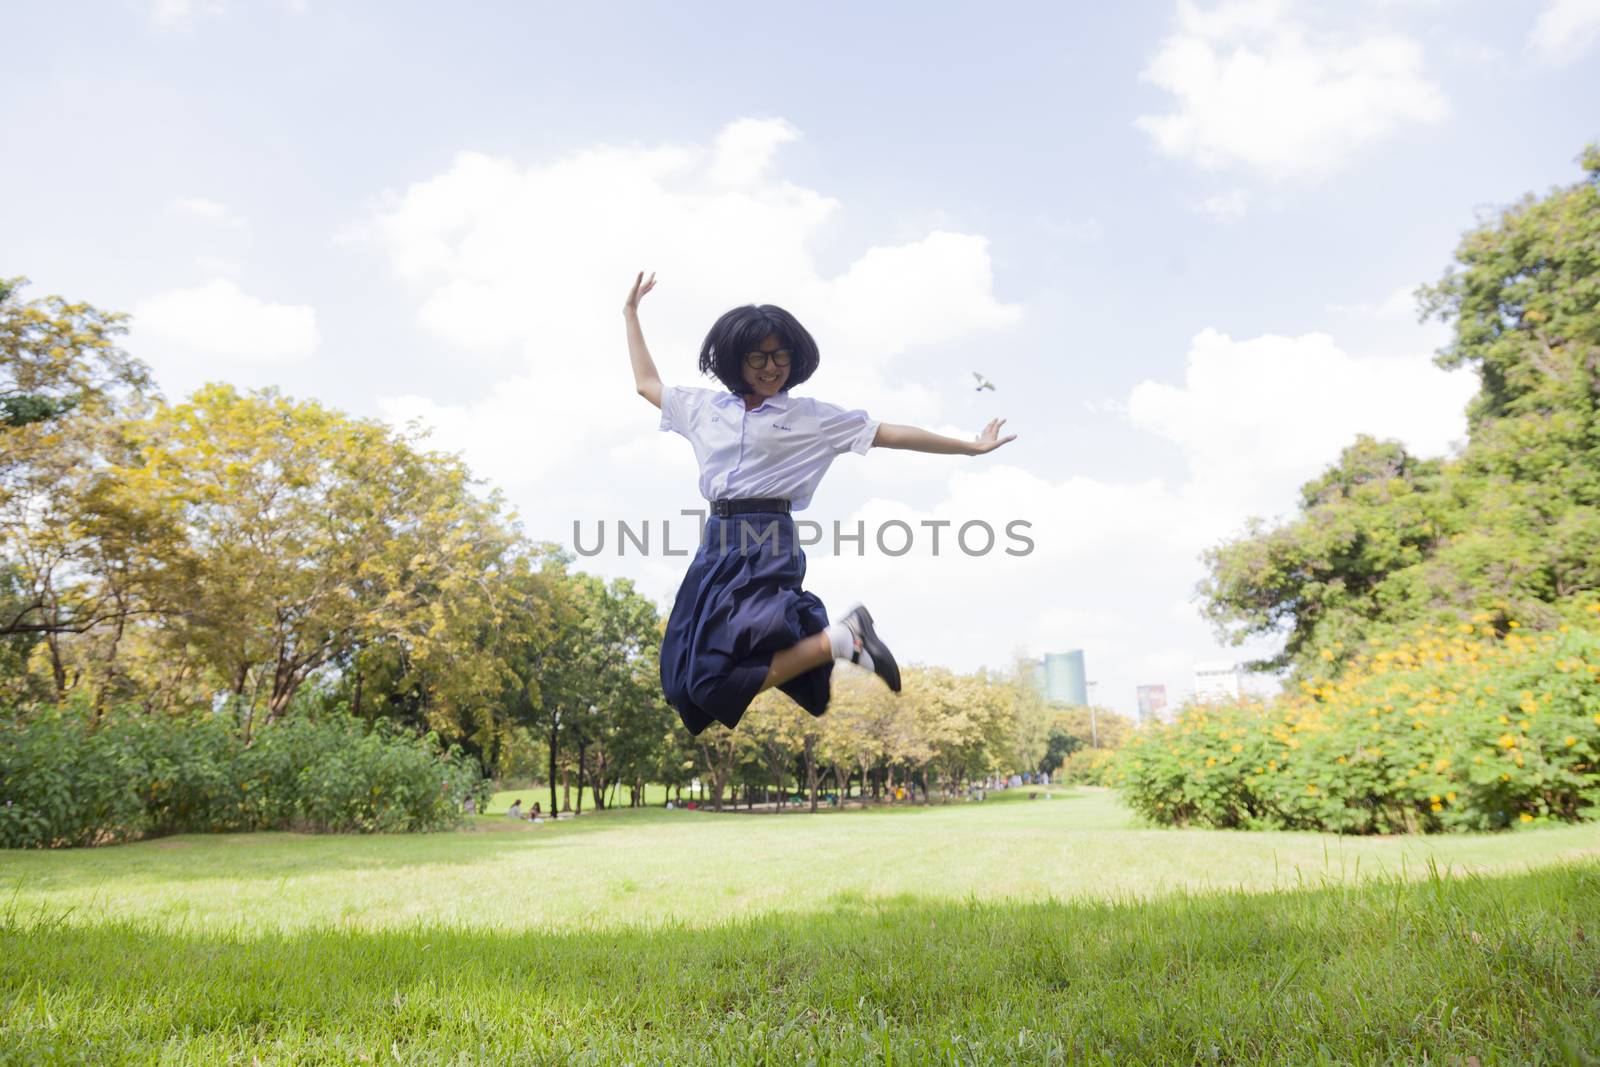 girl jumping Happy and fun.On grass in park